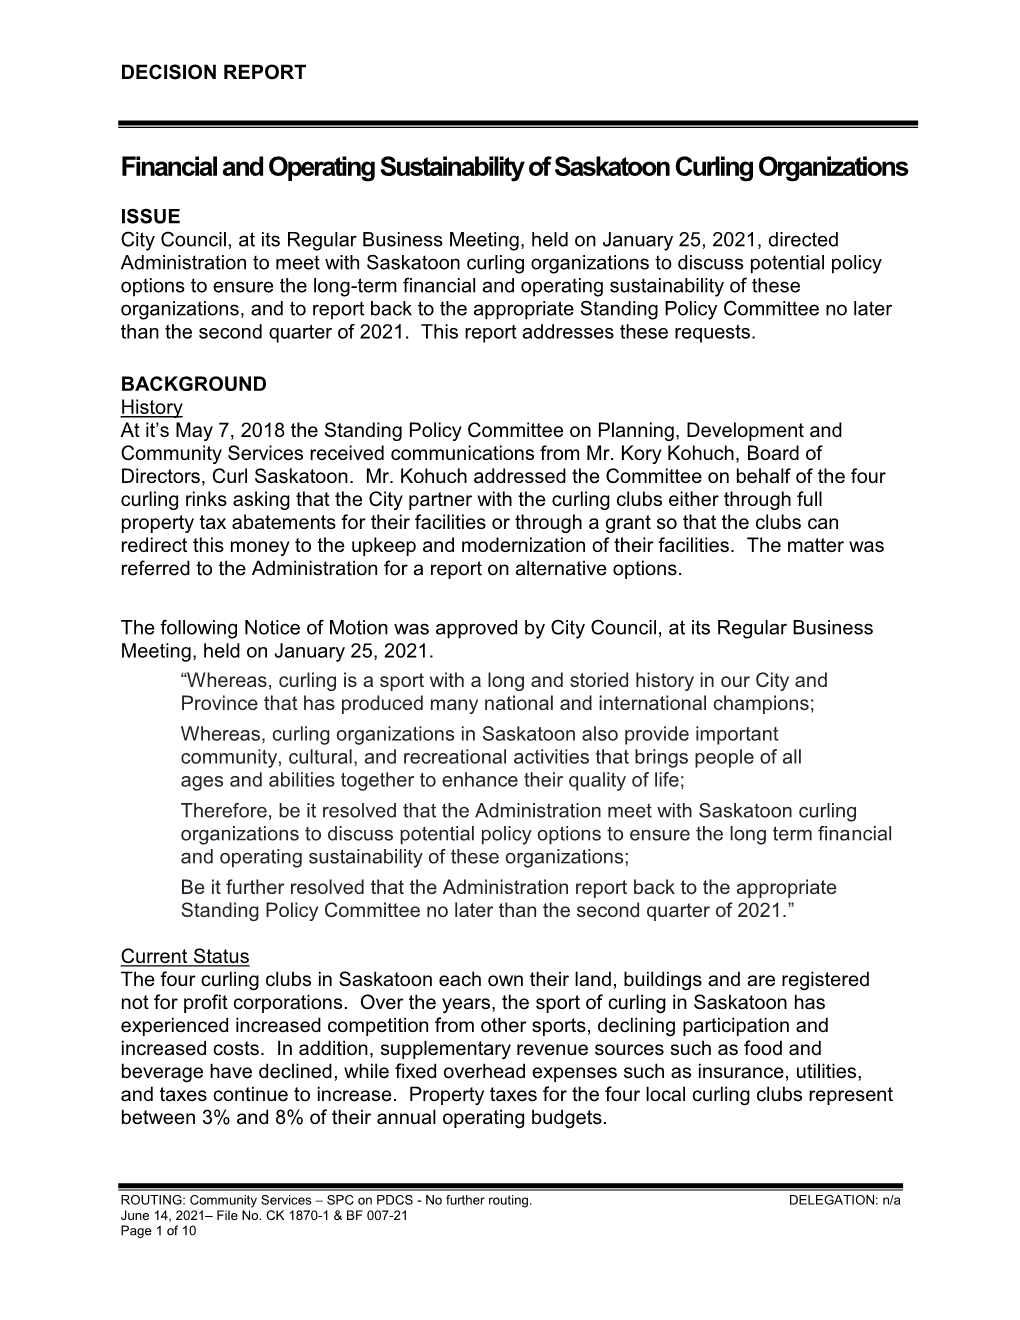 Financial and Operating Sustainability of Saskatoon Curling Organizations